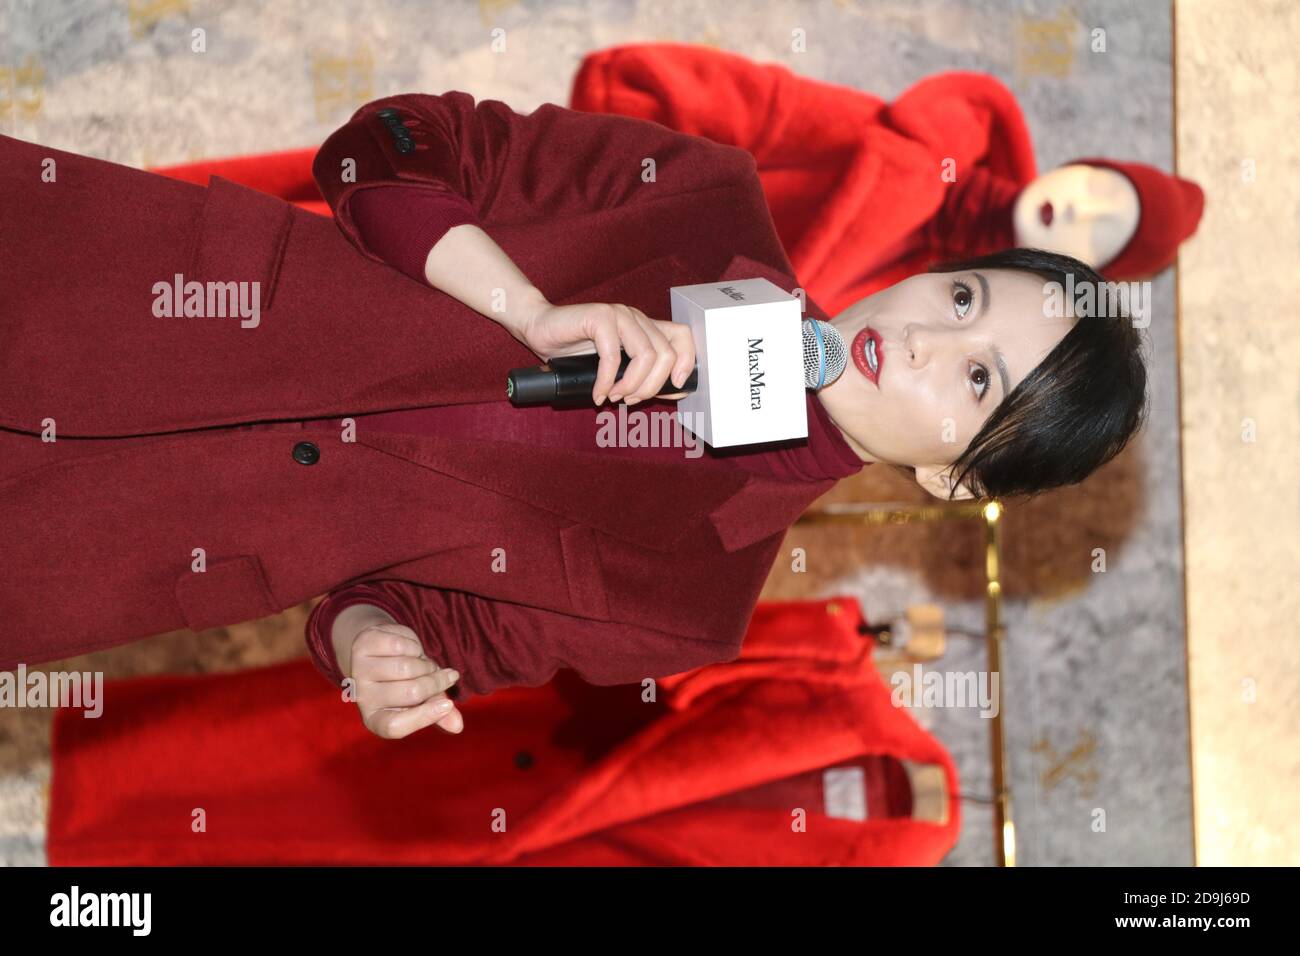 Chinese actress Faye Yu attends MaxMara commercial event in Beijing, China, 16 October 2020. Stock Photo